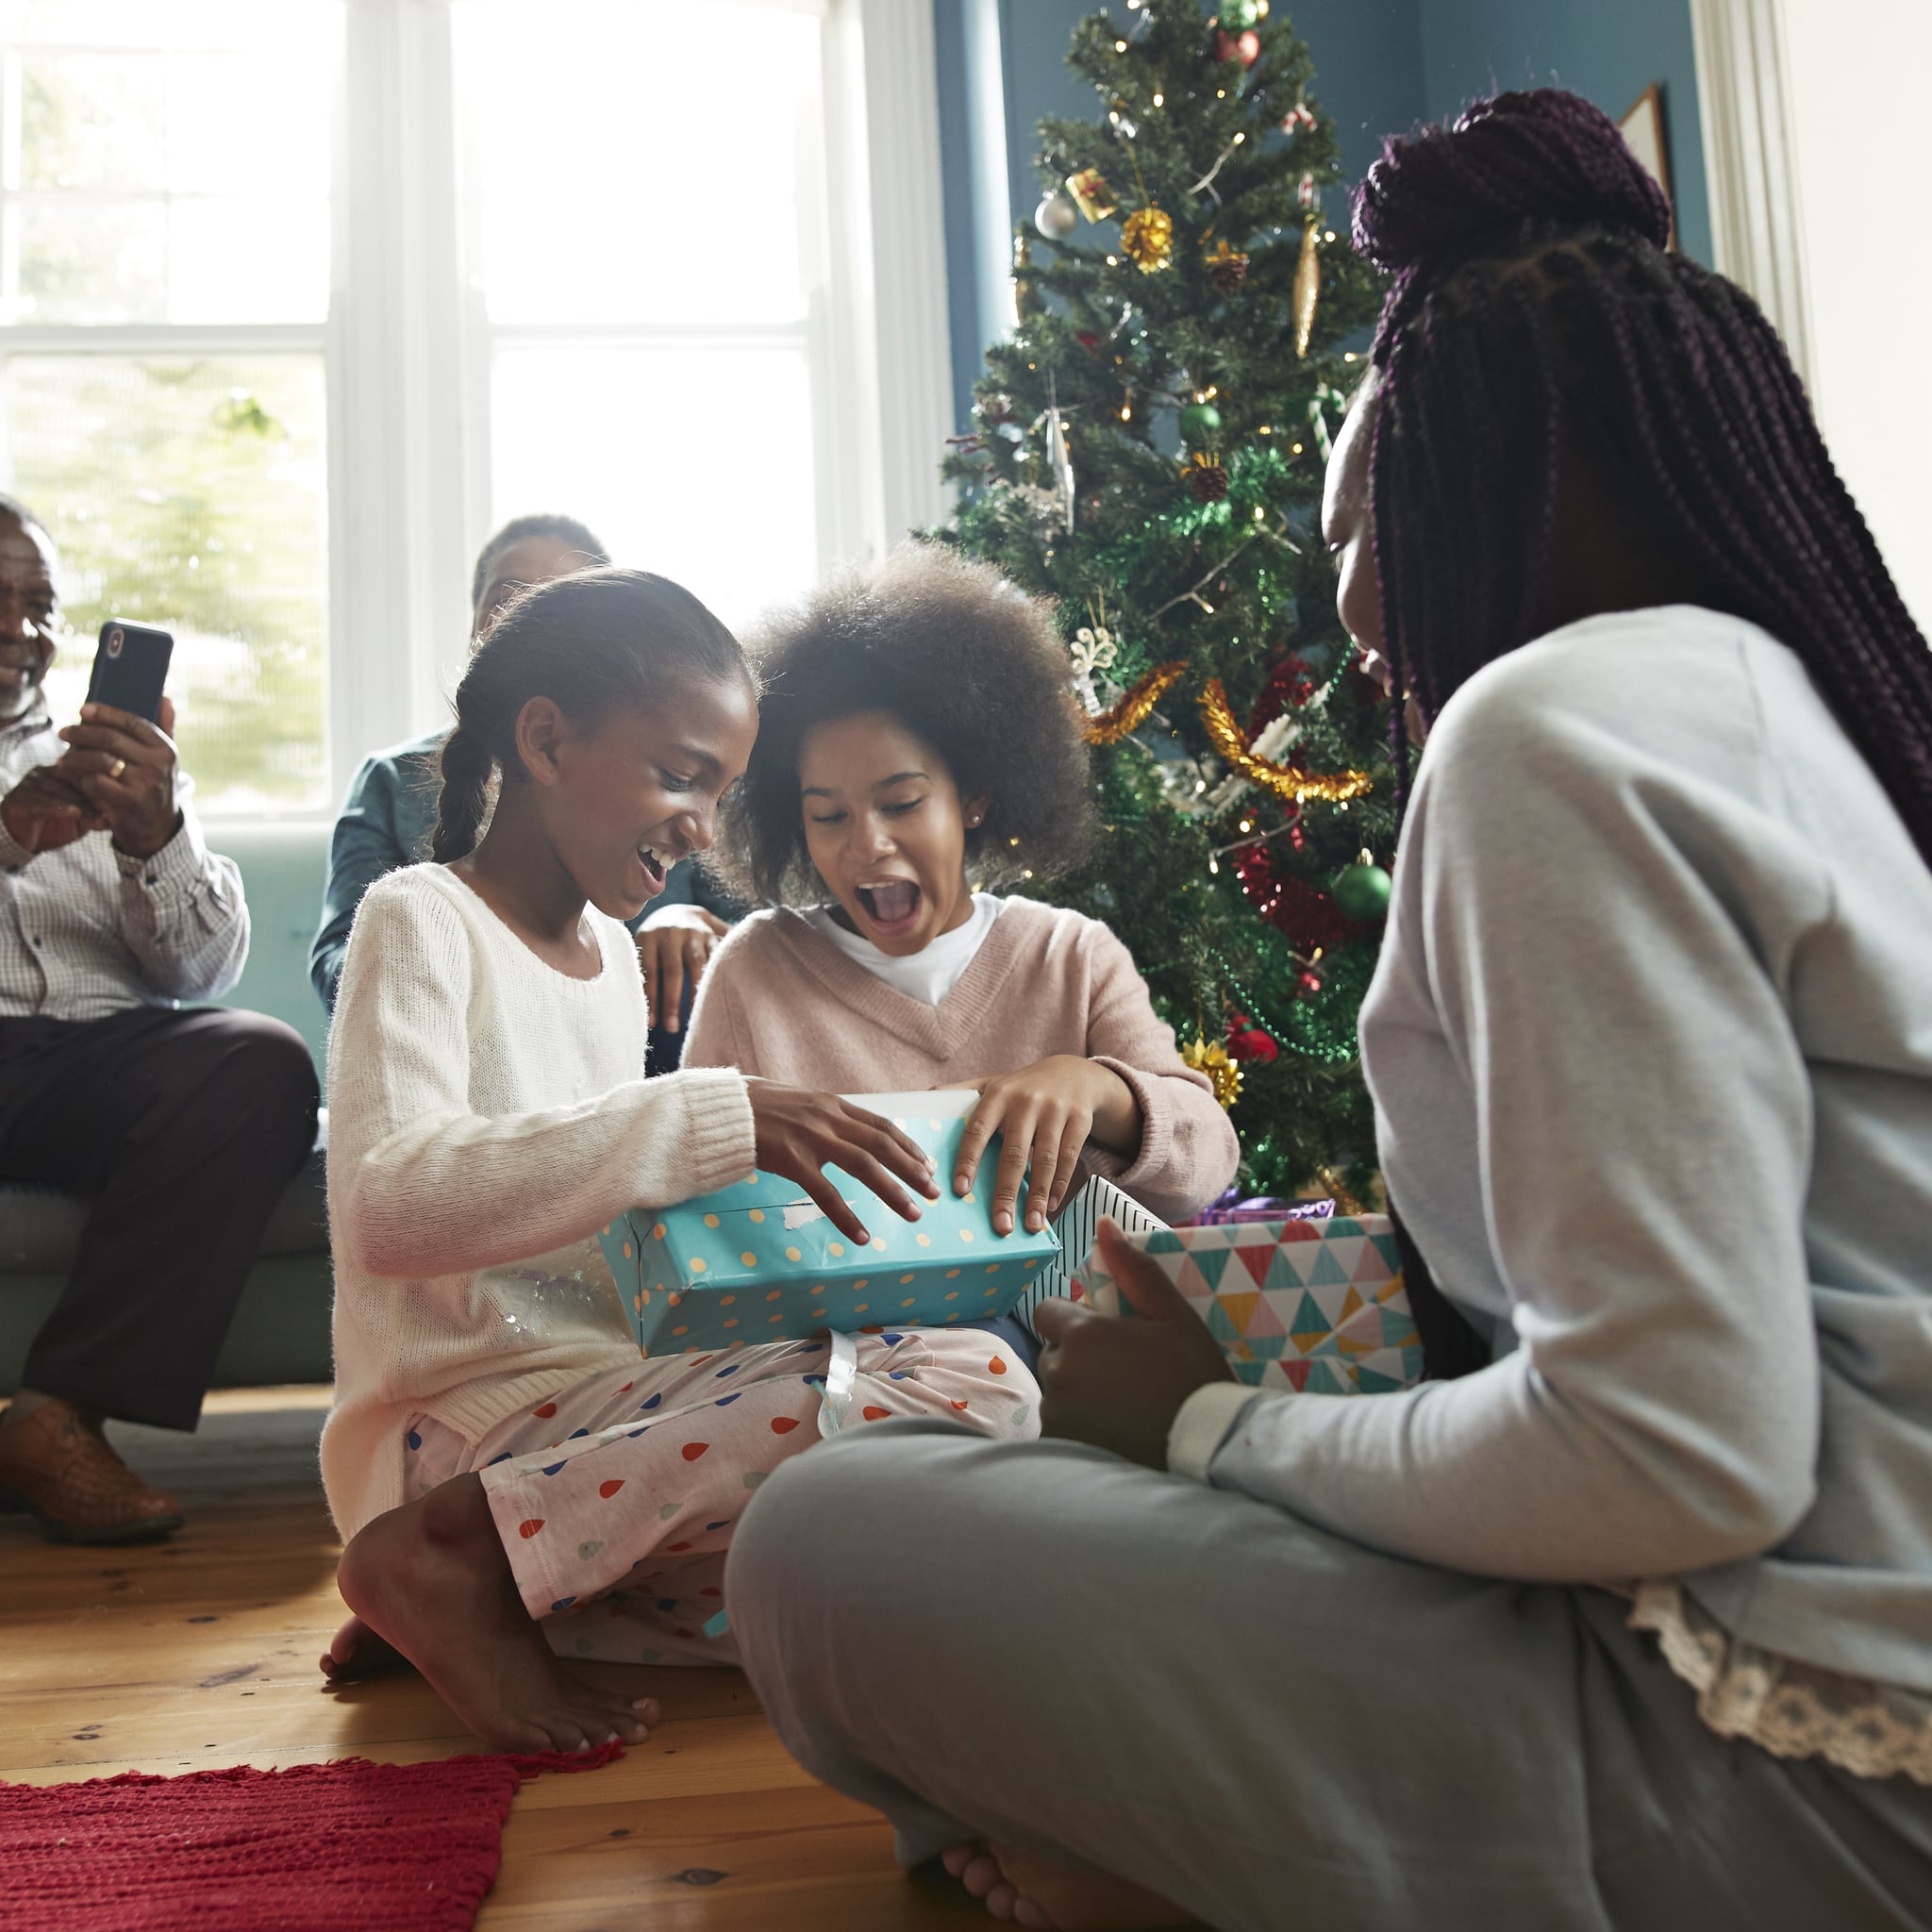 gifts for kids that have everything